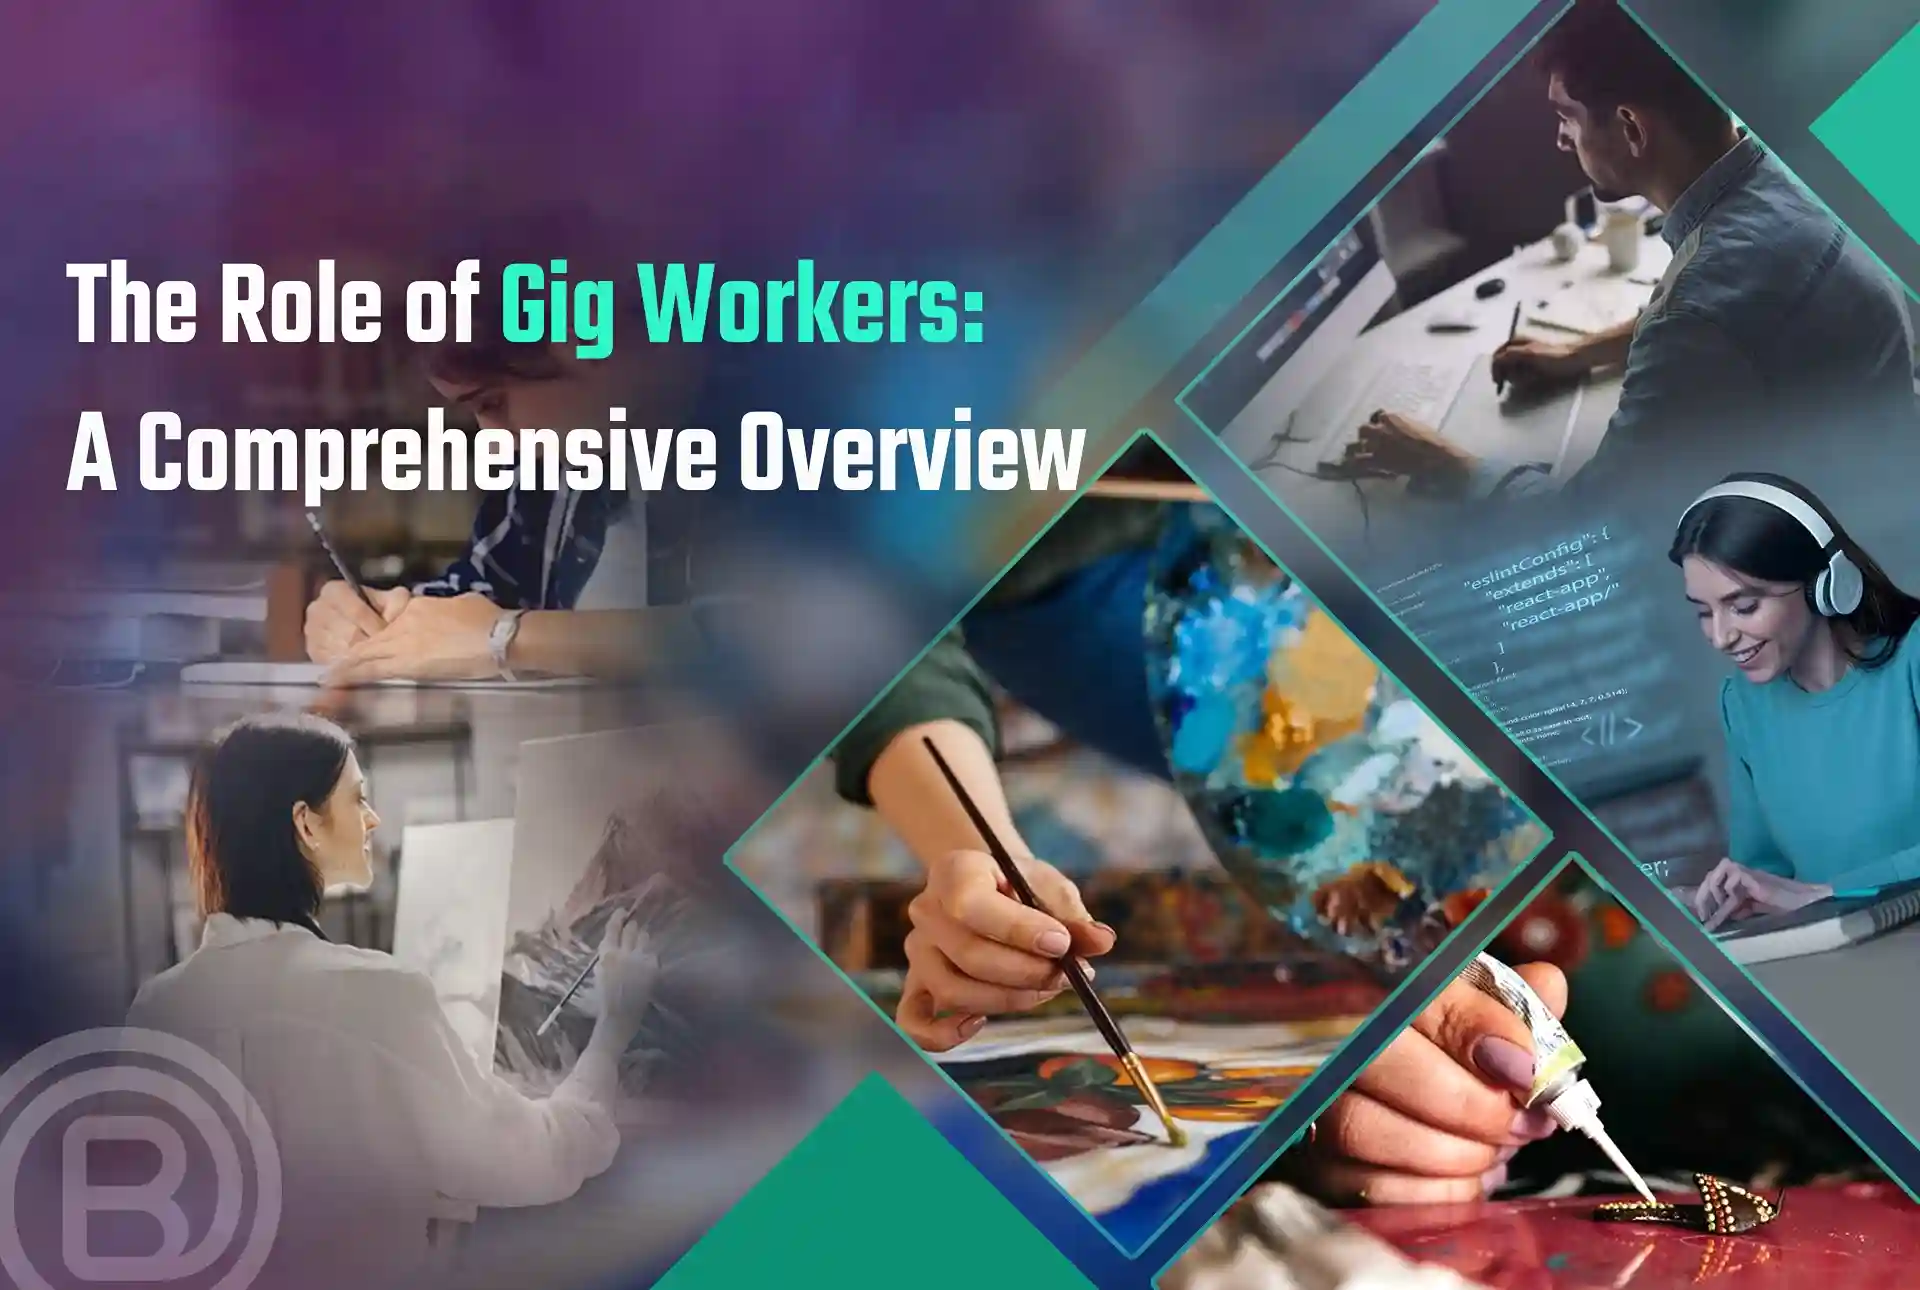 The Role of Gig Workers: A Comprehensive Overview